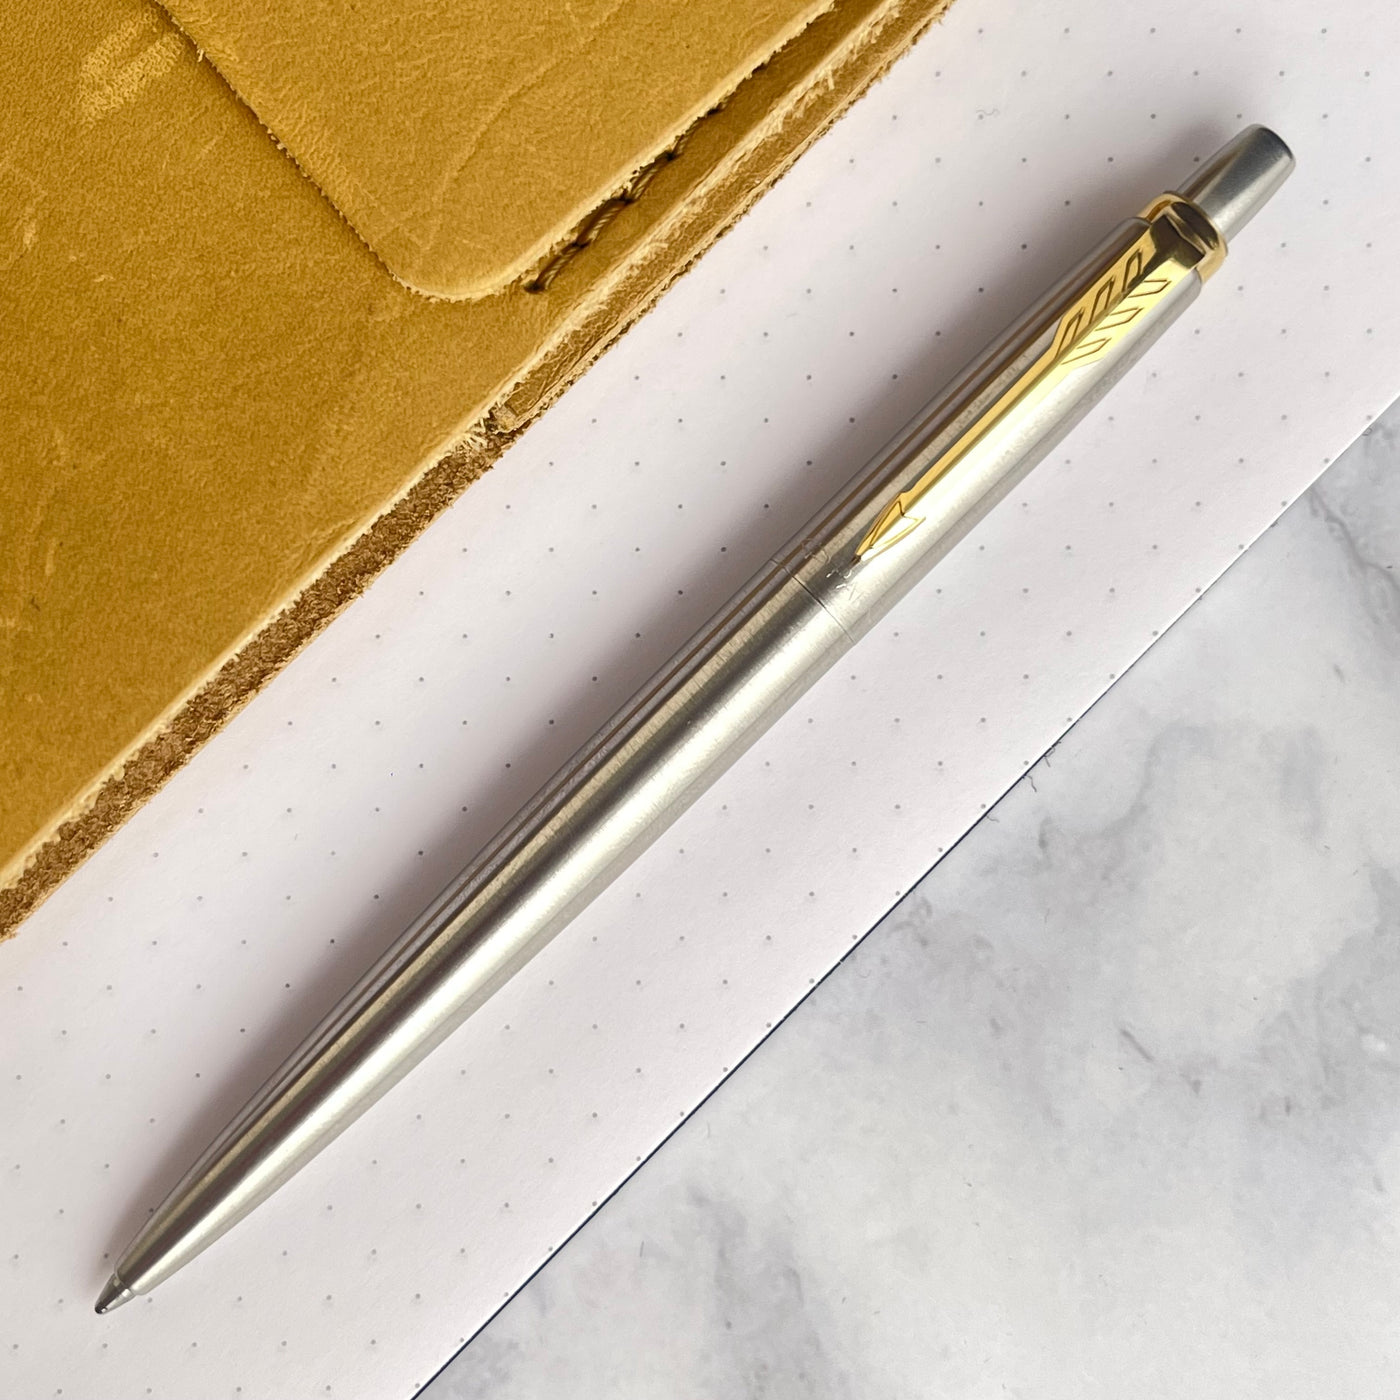 Parker Jotter Ballpoint Pen - Stainless Steel with Gold Clip